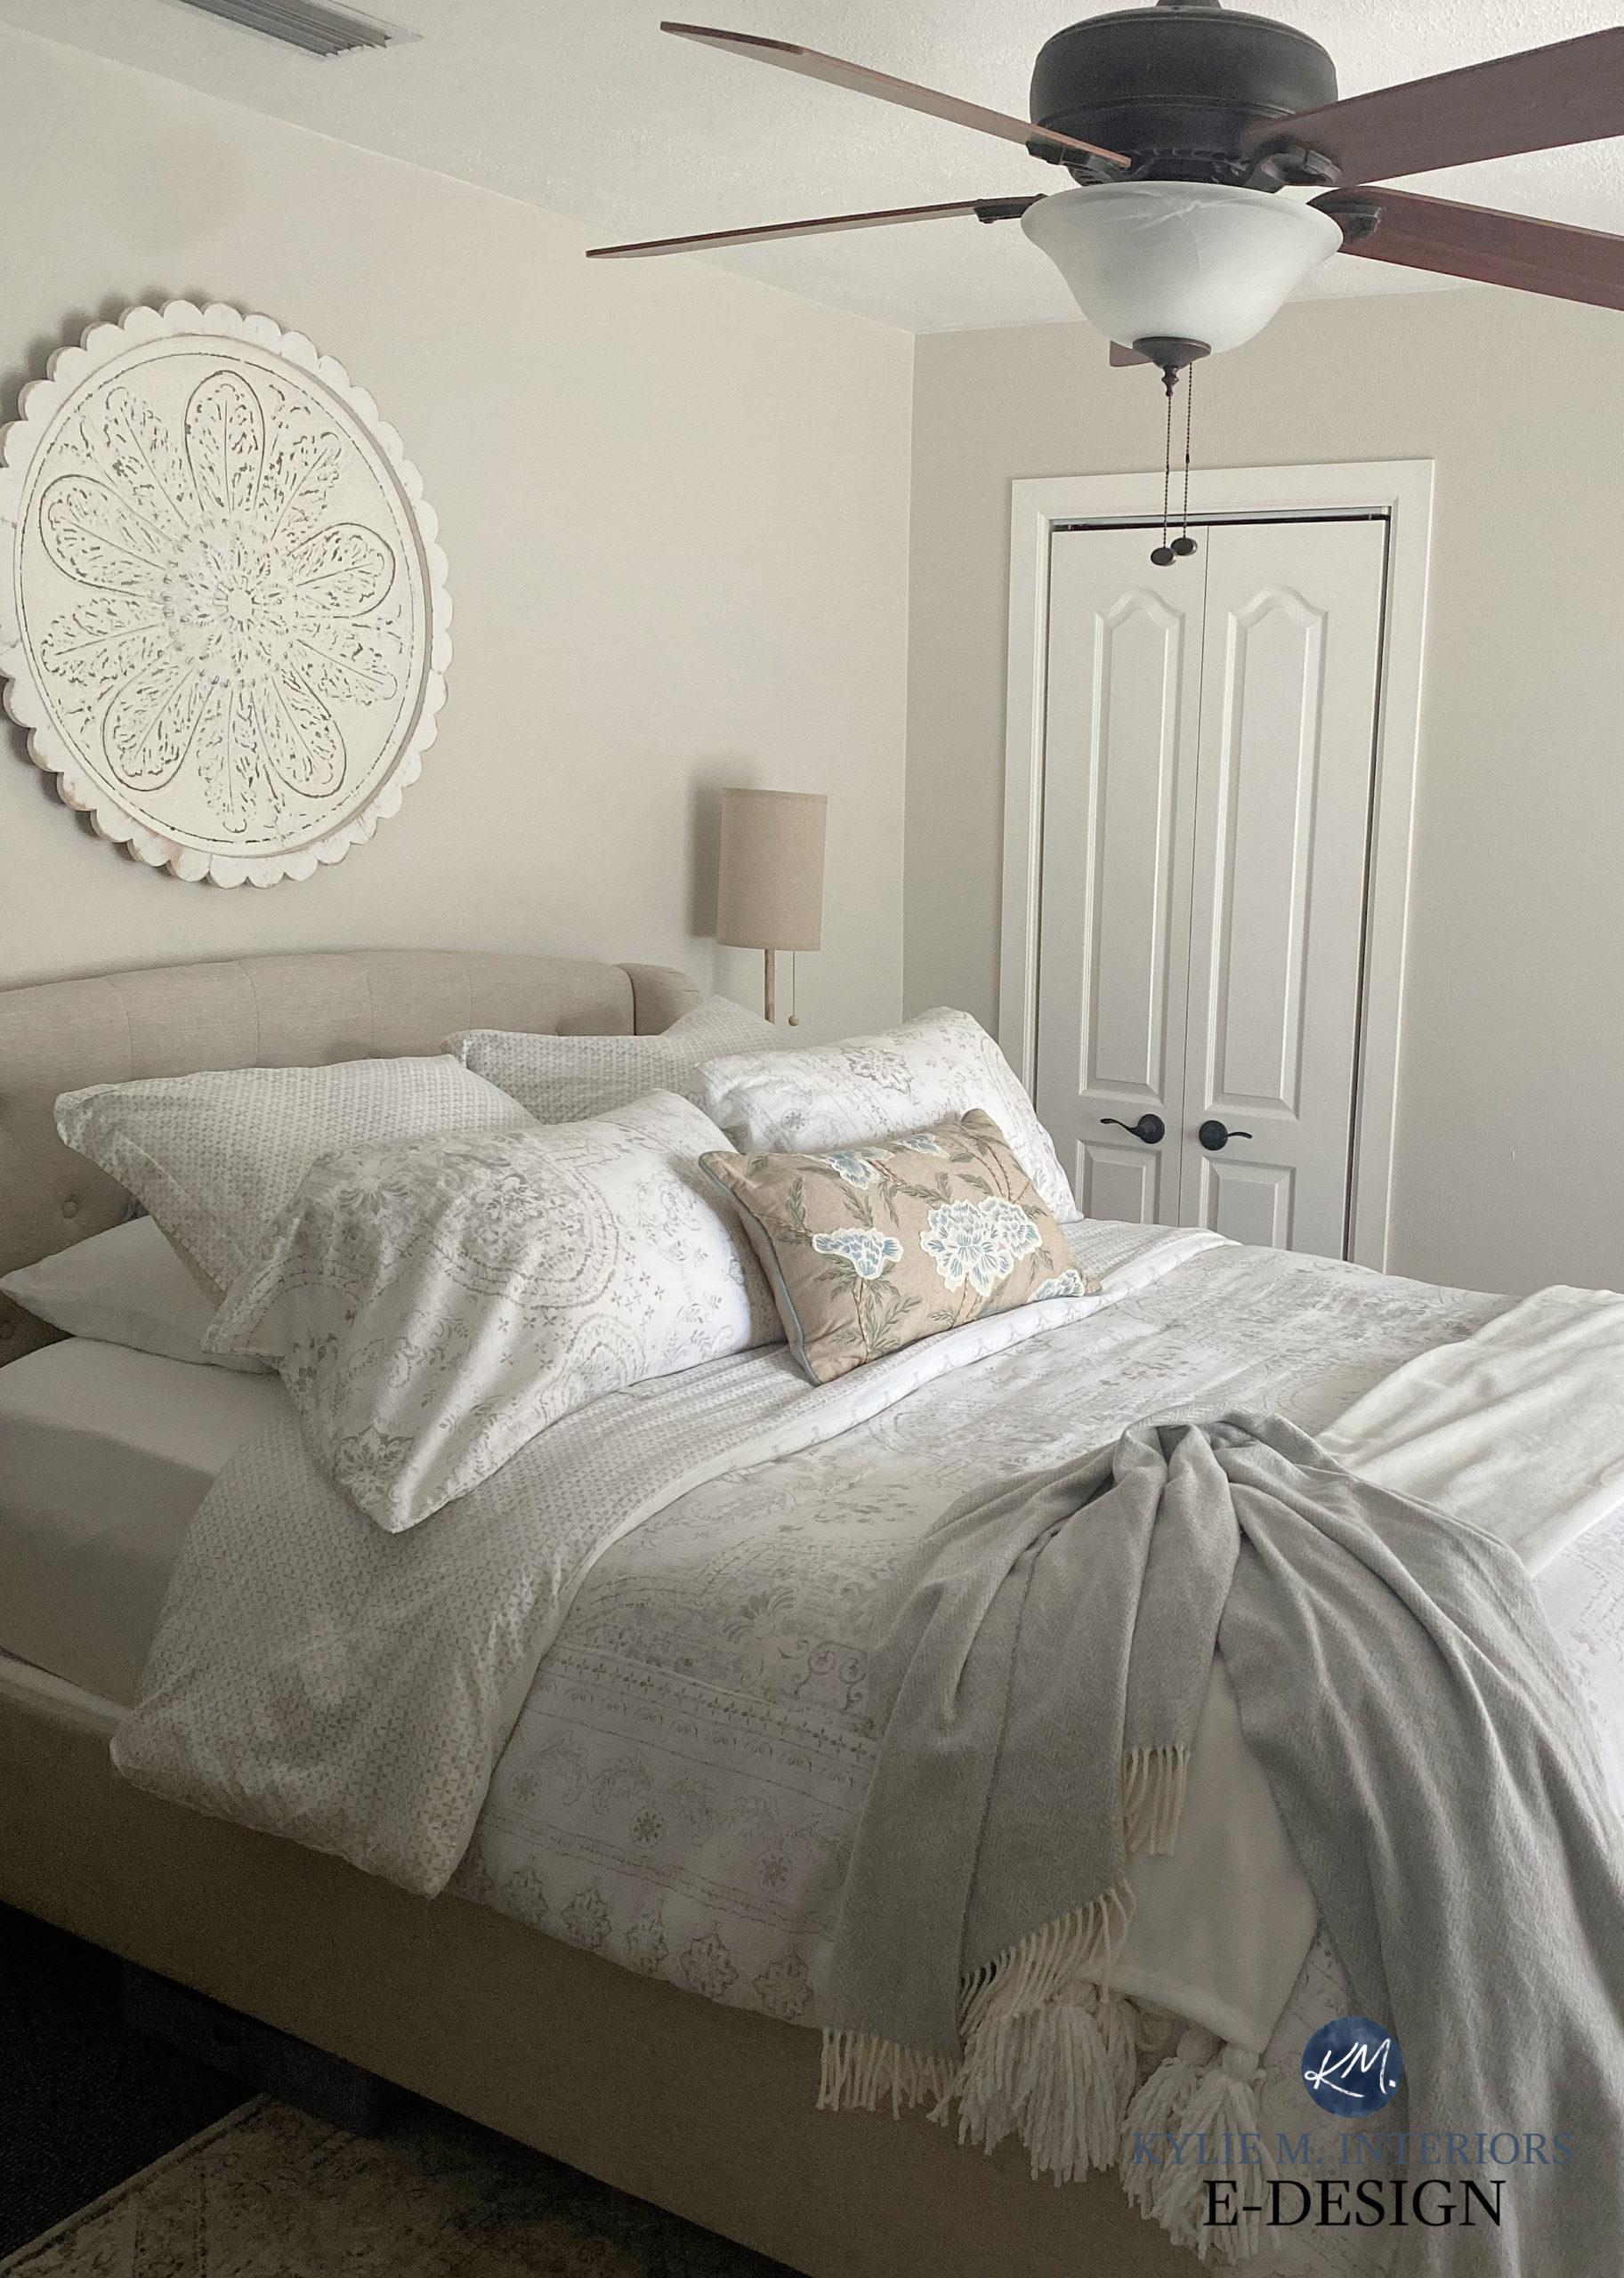 Transitional style primary bedroom with Sherwin Williams Egret White paint color on walls. Warm grey, taupe greige. ceiling fan. Kylie M Interiors Edeign